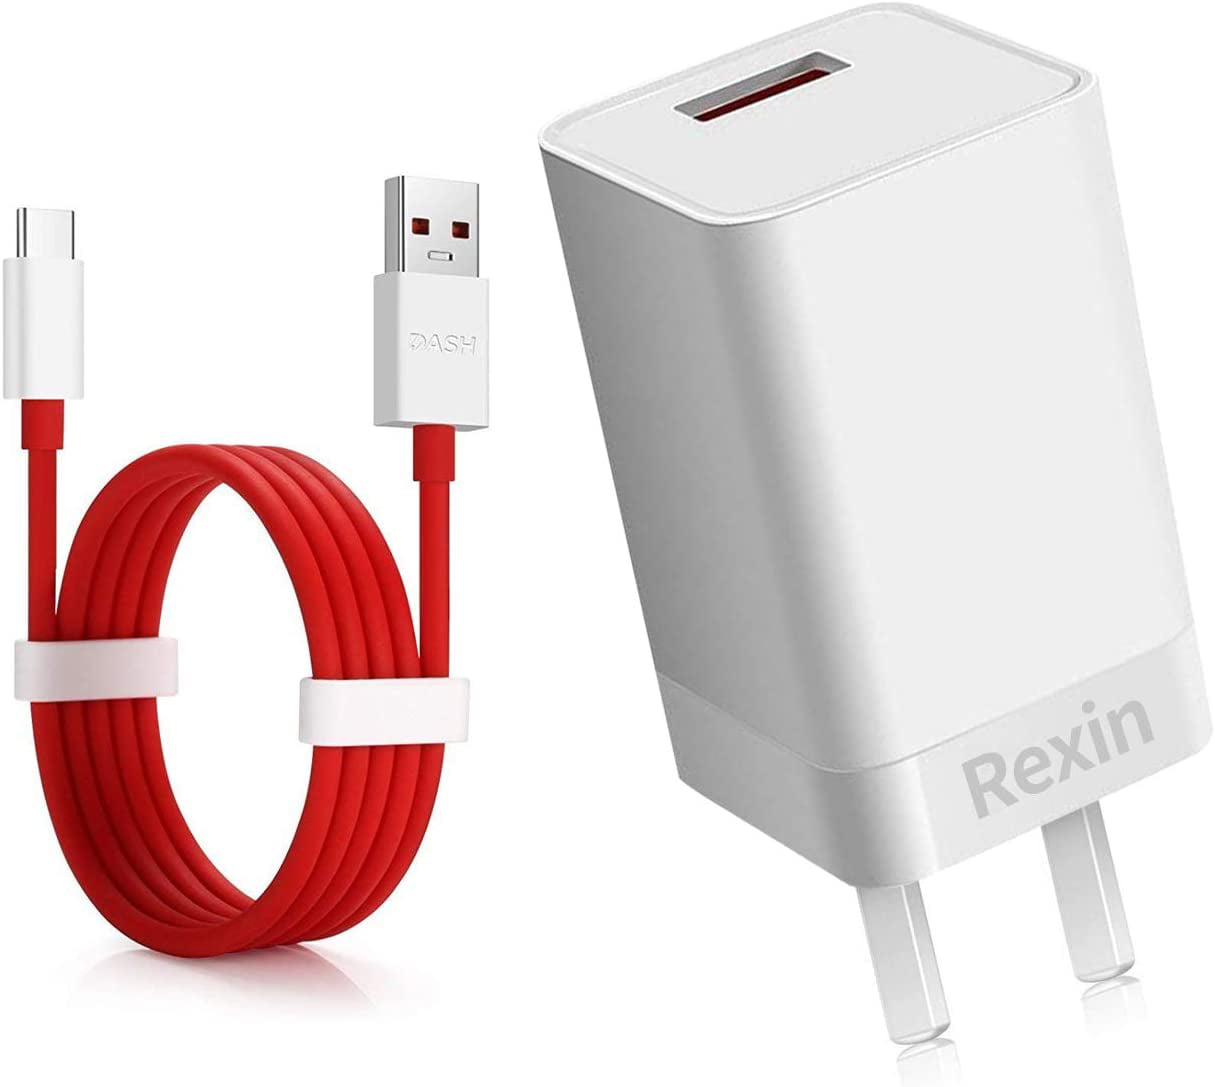 Verslagen Canberra Ongeschikt OnePlus 6 Dash Charger OnePlus 5T/5 Dash ChargerDash Power Adapter [5V 4A]  + OnePlus Dash Charging Cable 1M / 3.3FT USB - Walmart.com